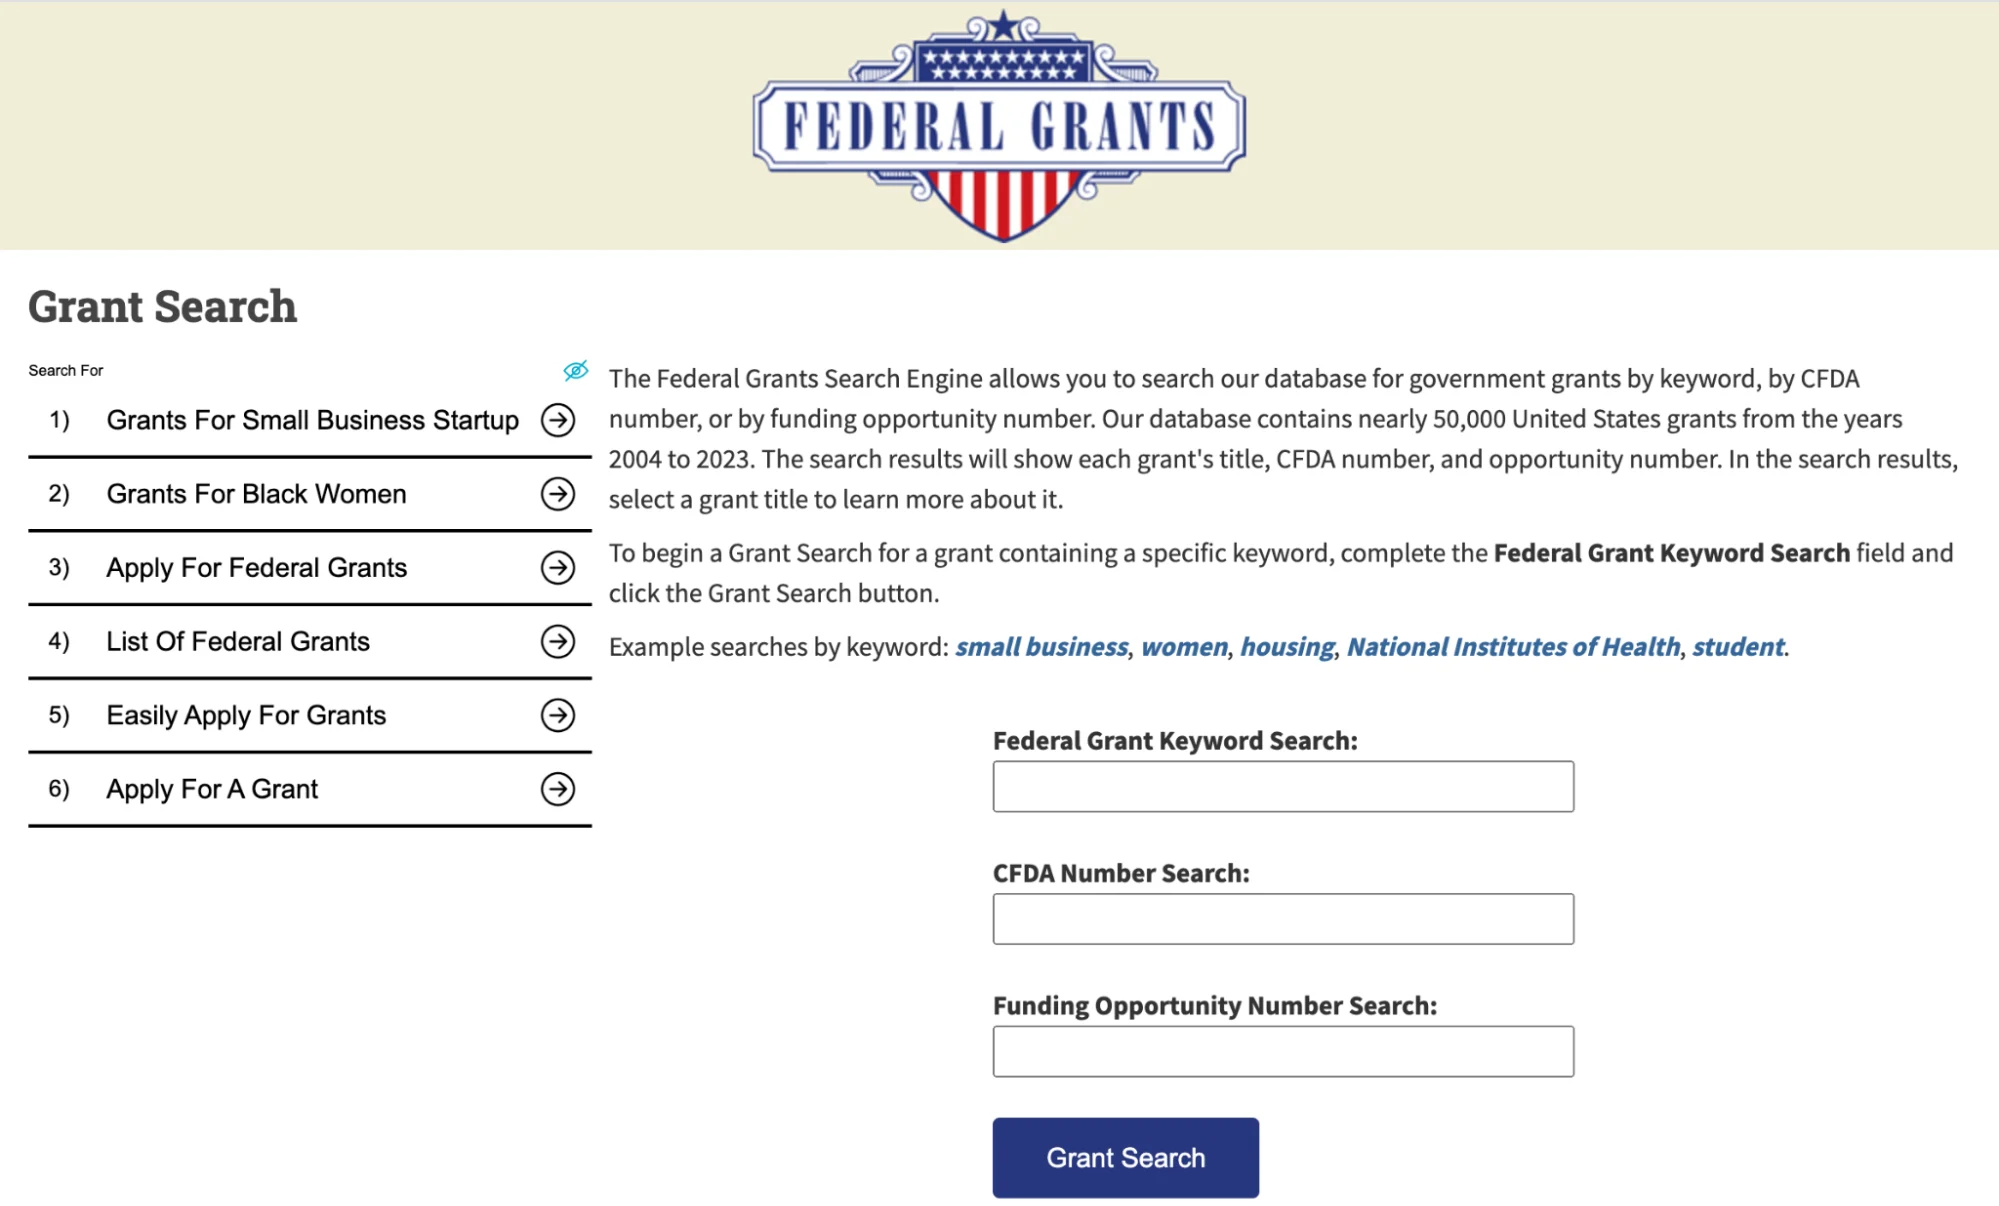 federalgrants.com database for youth sports grants